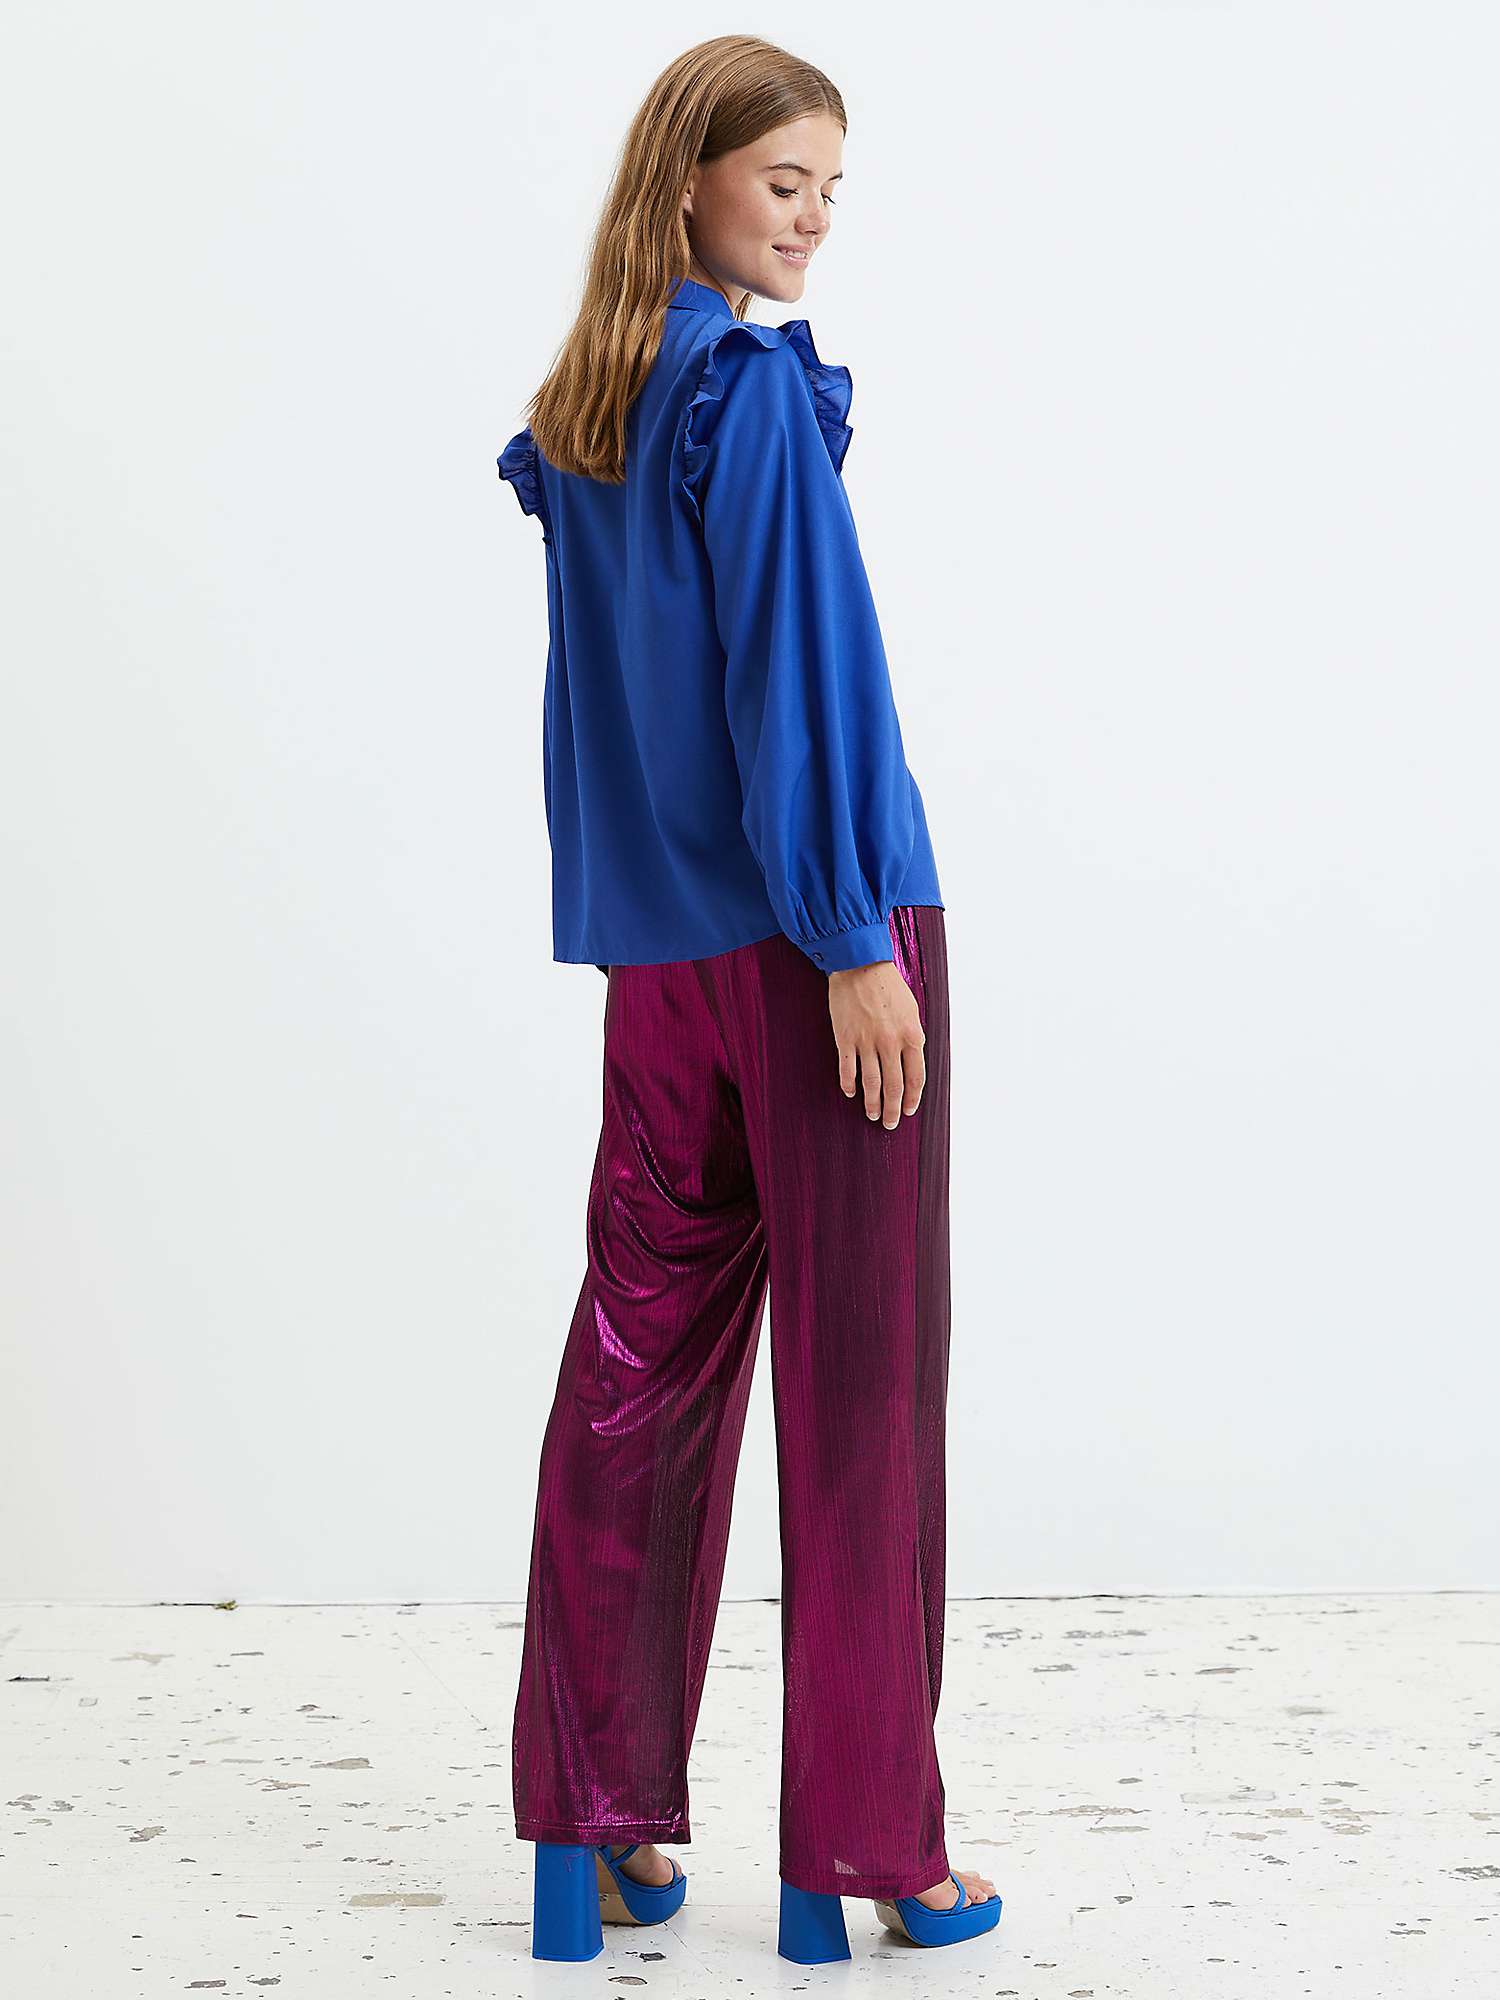 Buy Lollys Laundry Alexis Frill Detail Blouse Online at johnlewis.com